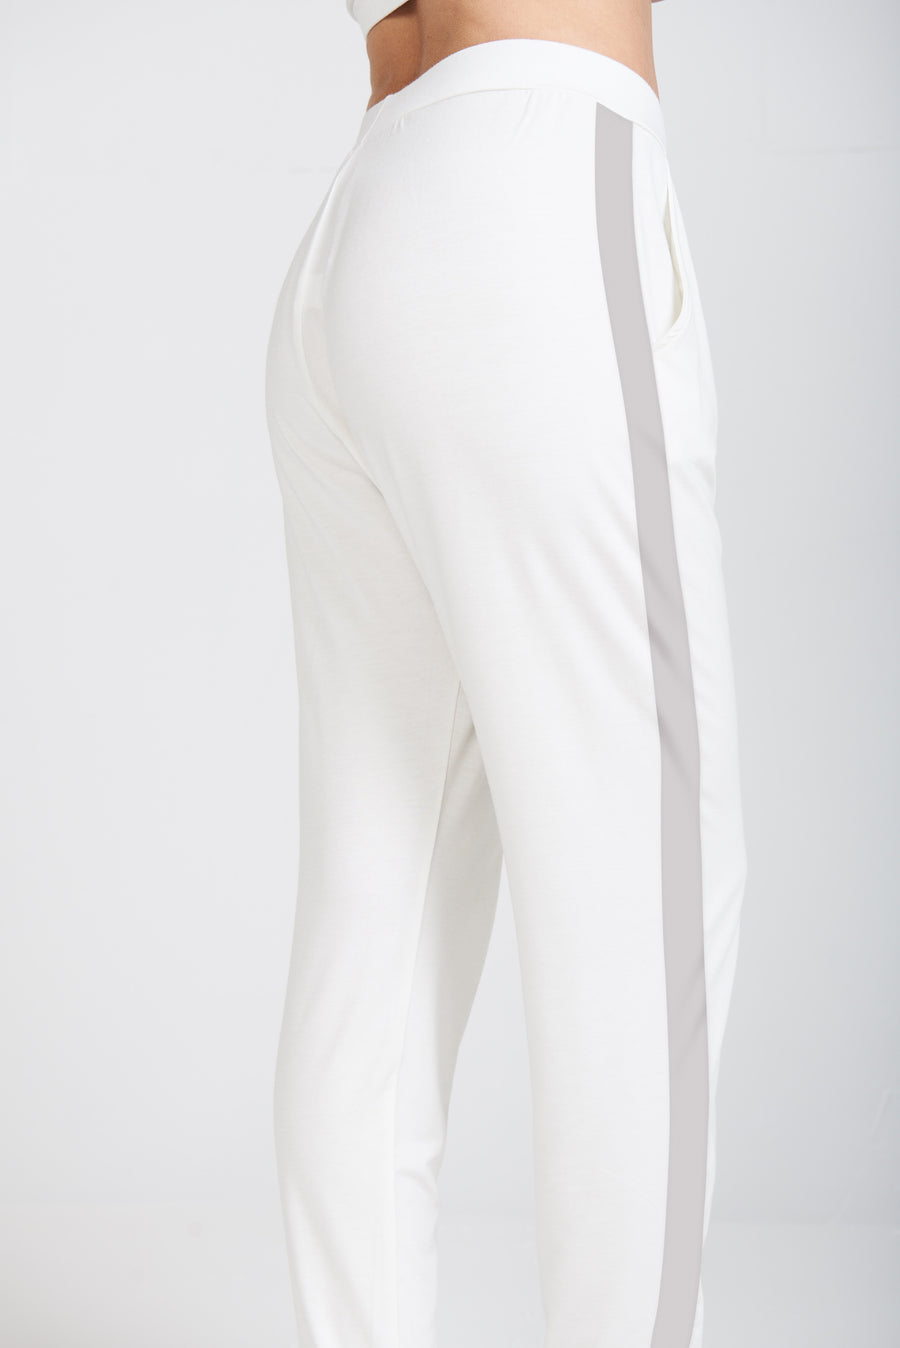 Divine Pants - Ivory, Cloud - Asquith